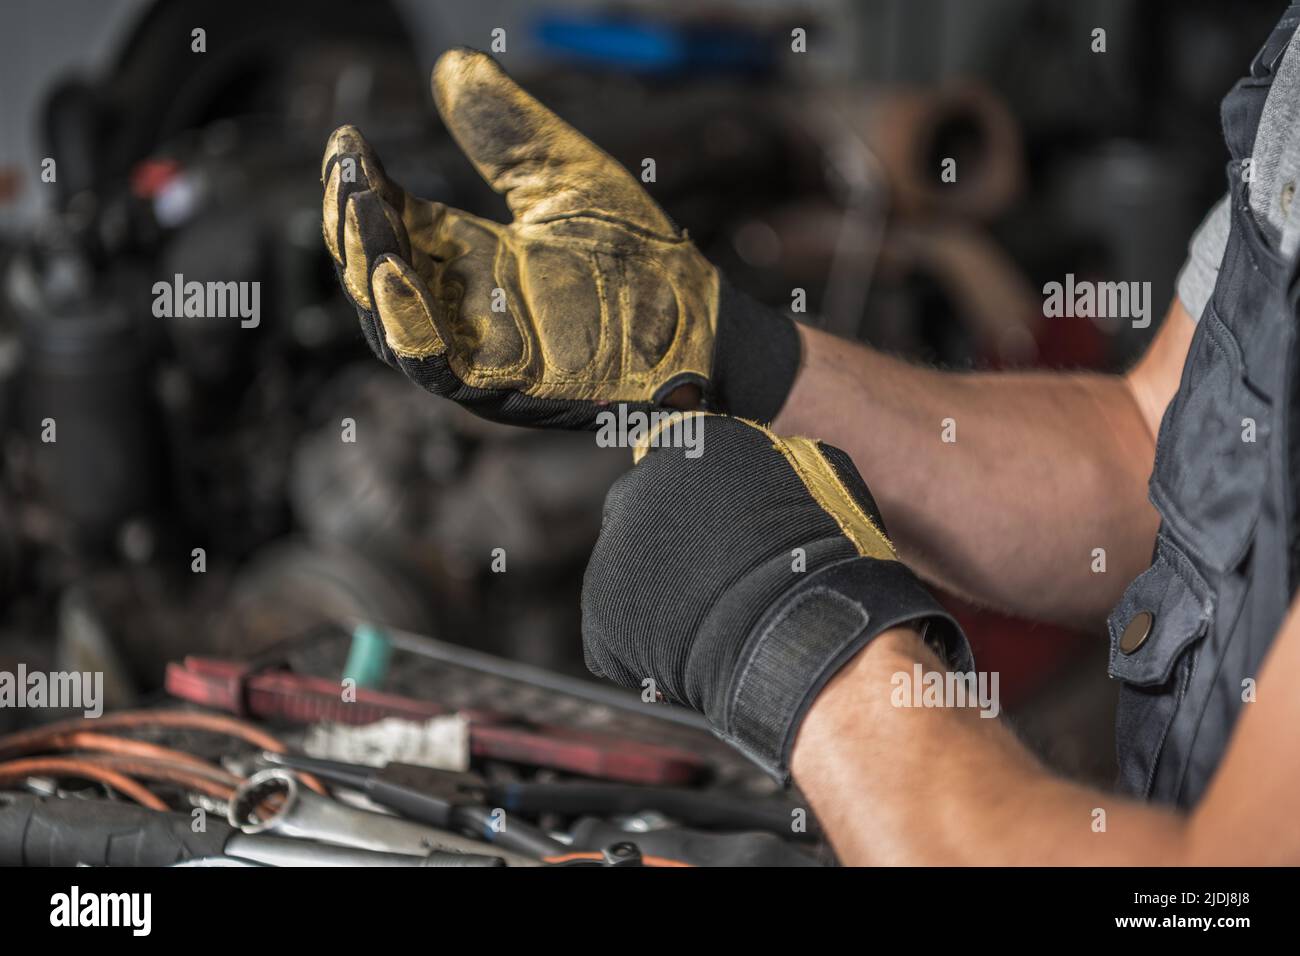 Closeup of Caucasian Mechanic's Dirty Work Gloves After a Day of Hard Work at the Car Shop Station. Automotive Theme. Stock Photo